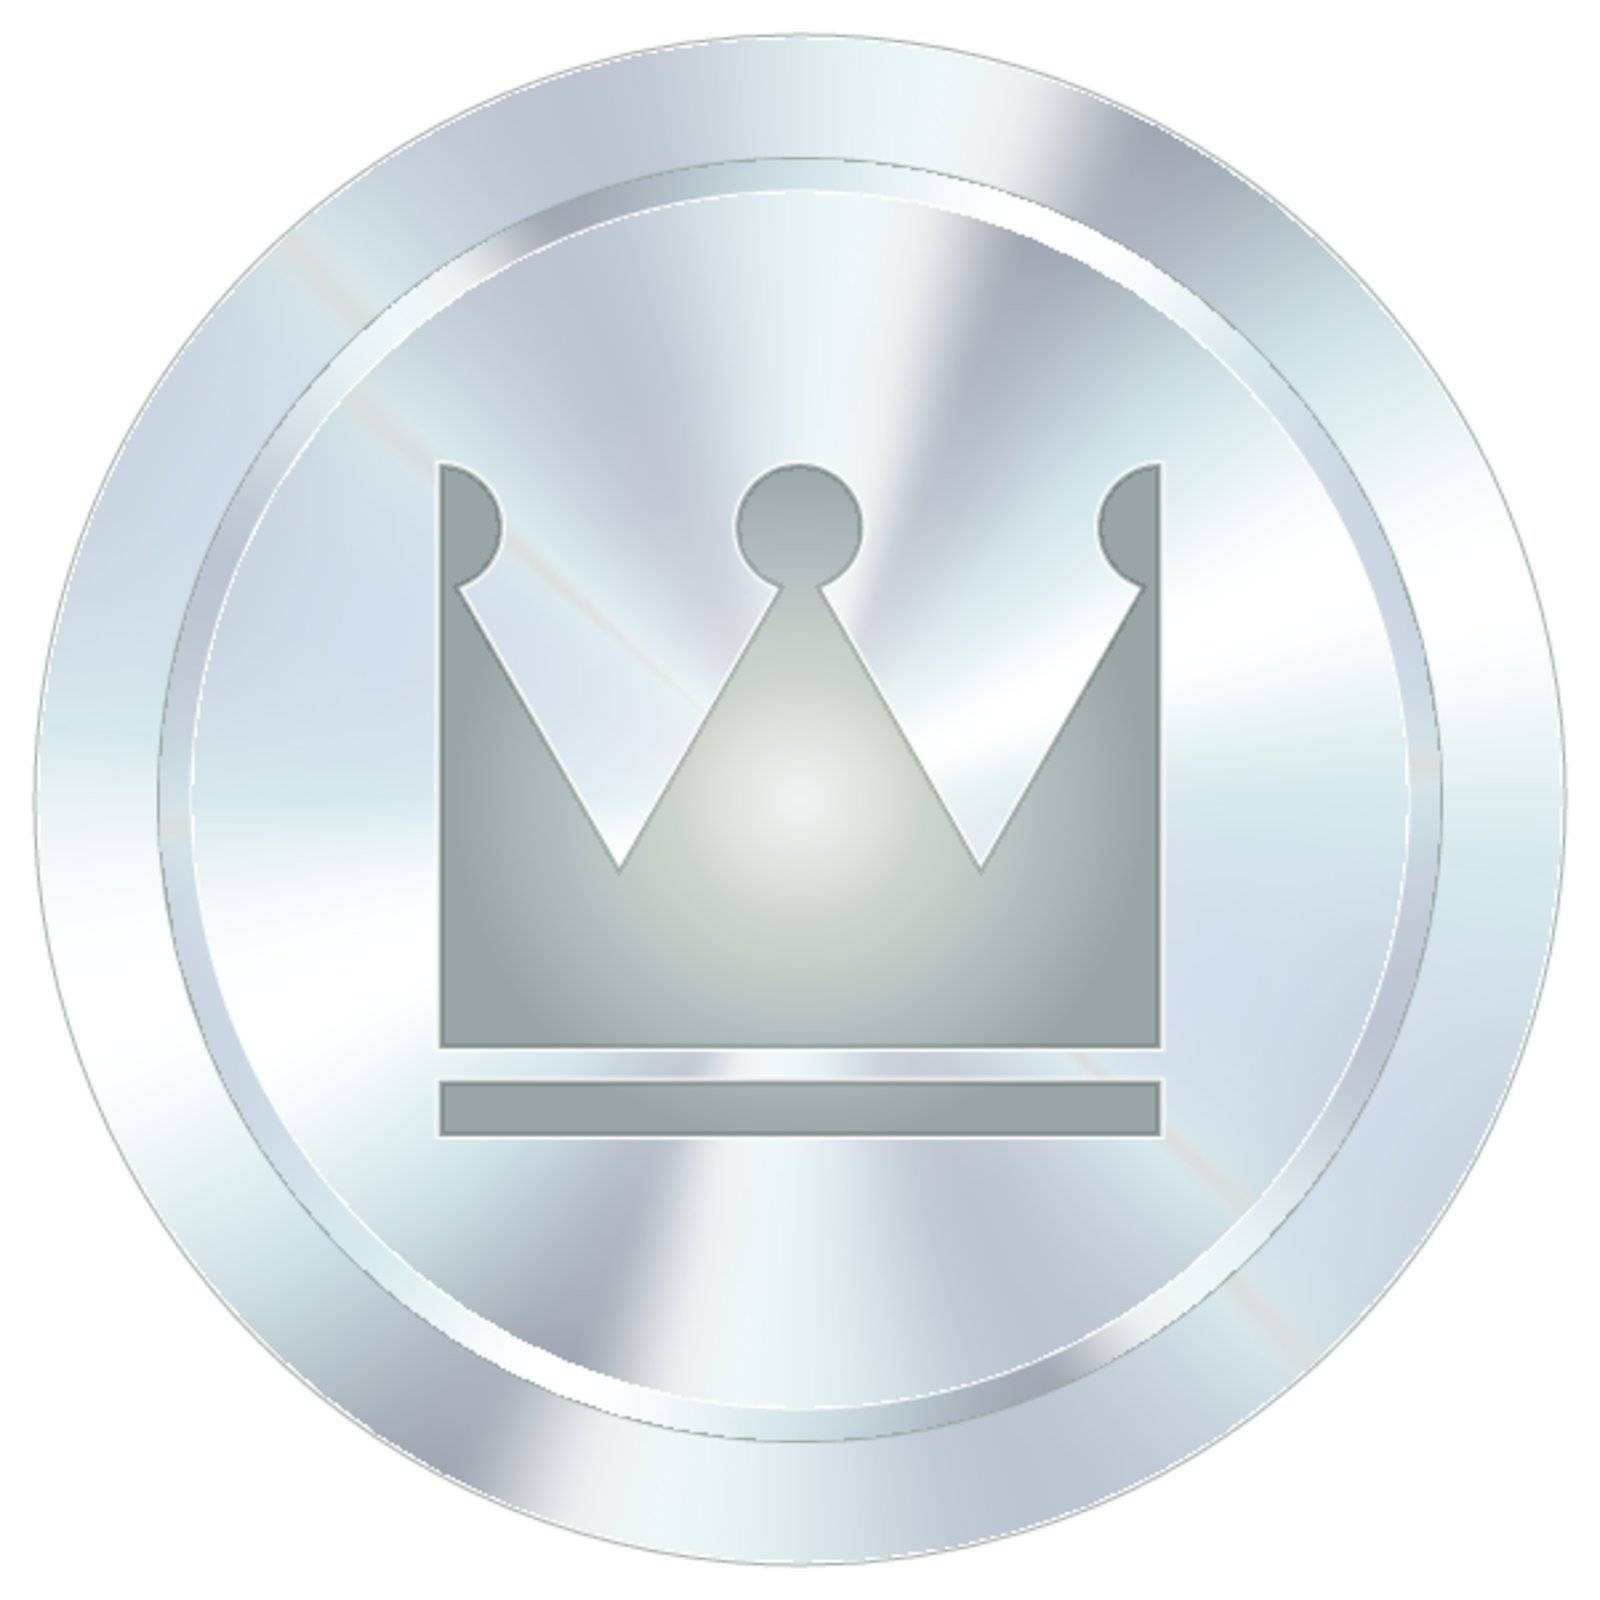 Crown icon on round stainless steel modern industrial button